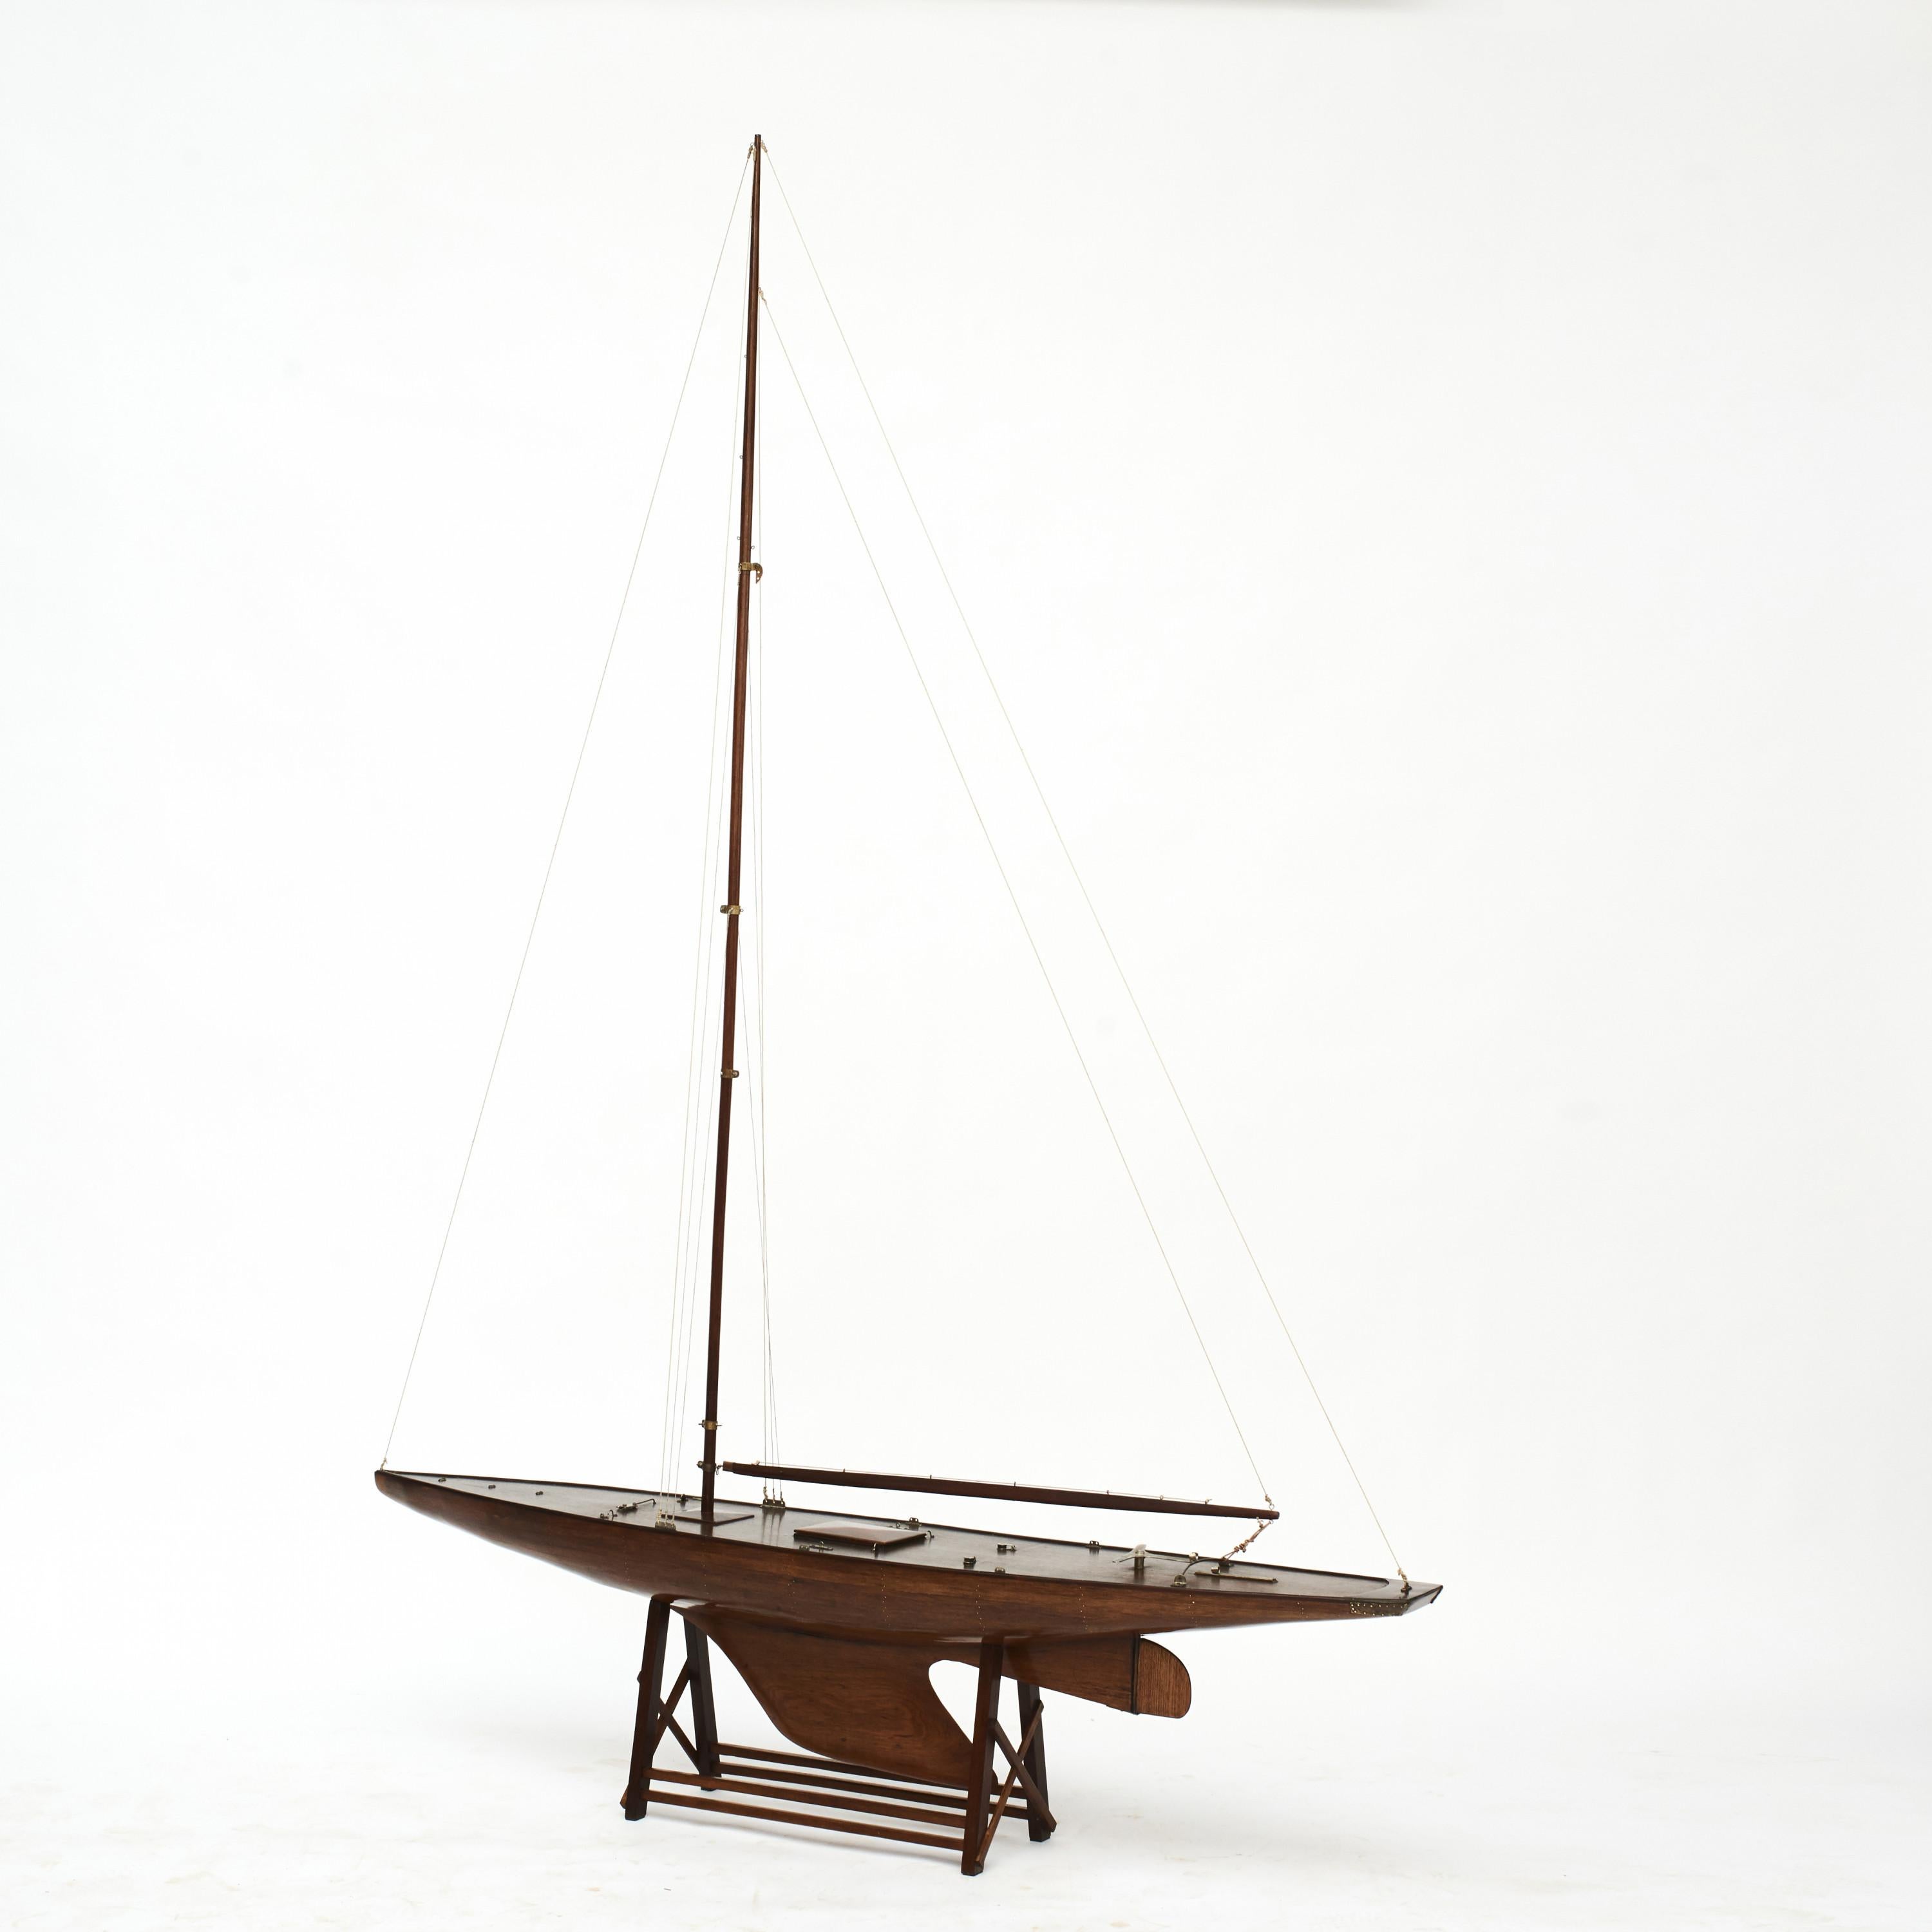 A very elegant wooden pond yacht ship model. High quality, hand-built.
Hull and mast made in santos mahogany with fine details.
Set onto a custom wood stand to hold the ship upright and stabile.
Denmark 1930-1950.

Height ex base 227 cm.